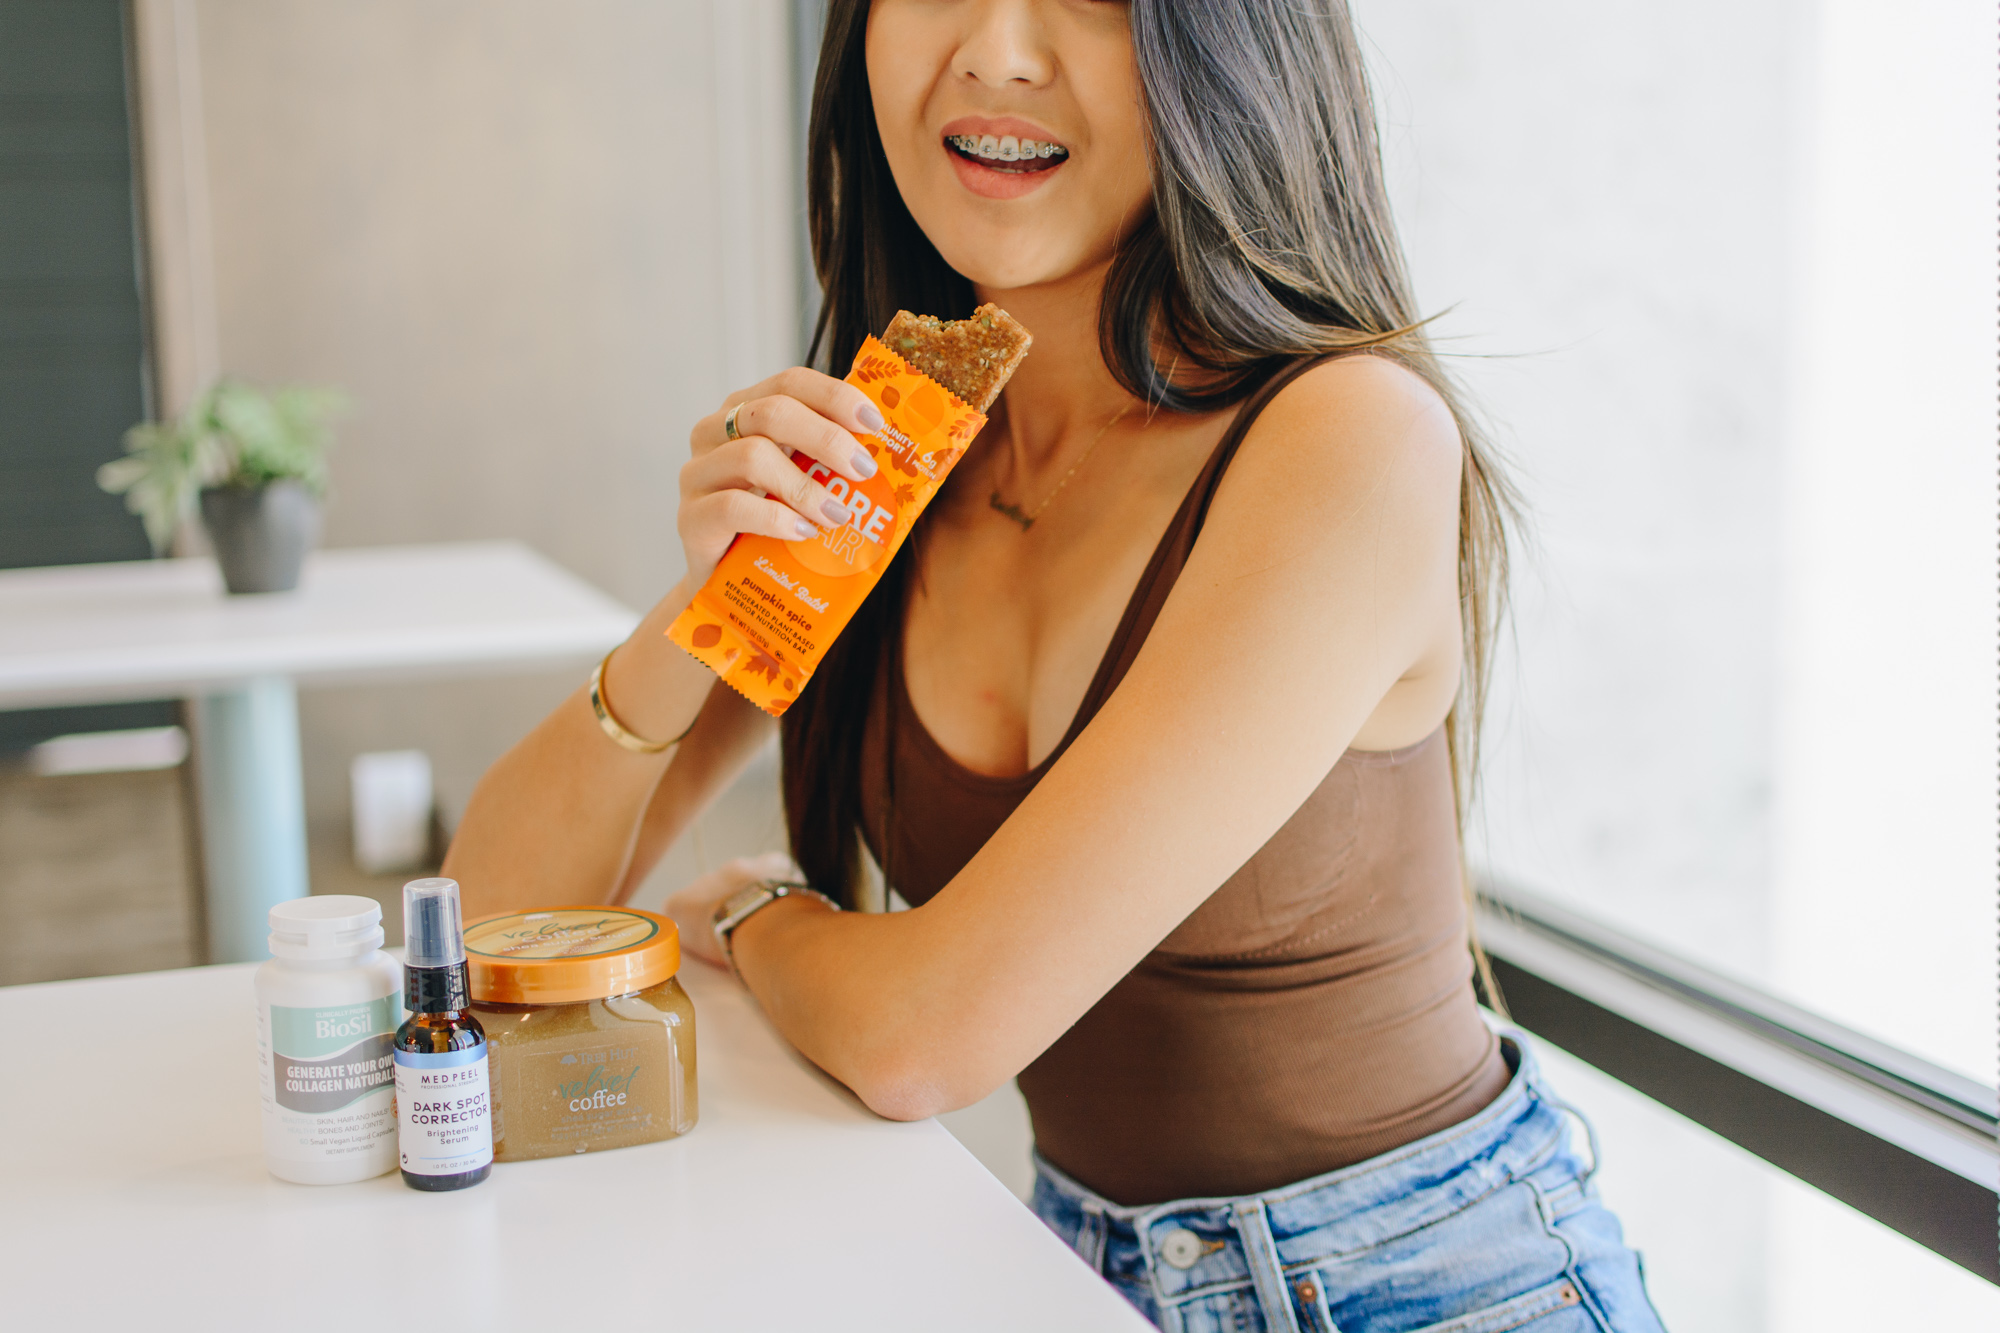 Arizona blogger Demi Bang talks about how she stays on top of your health and wellness transitioning from summer to autumn!